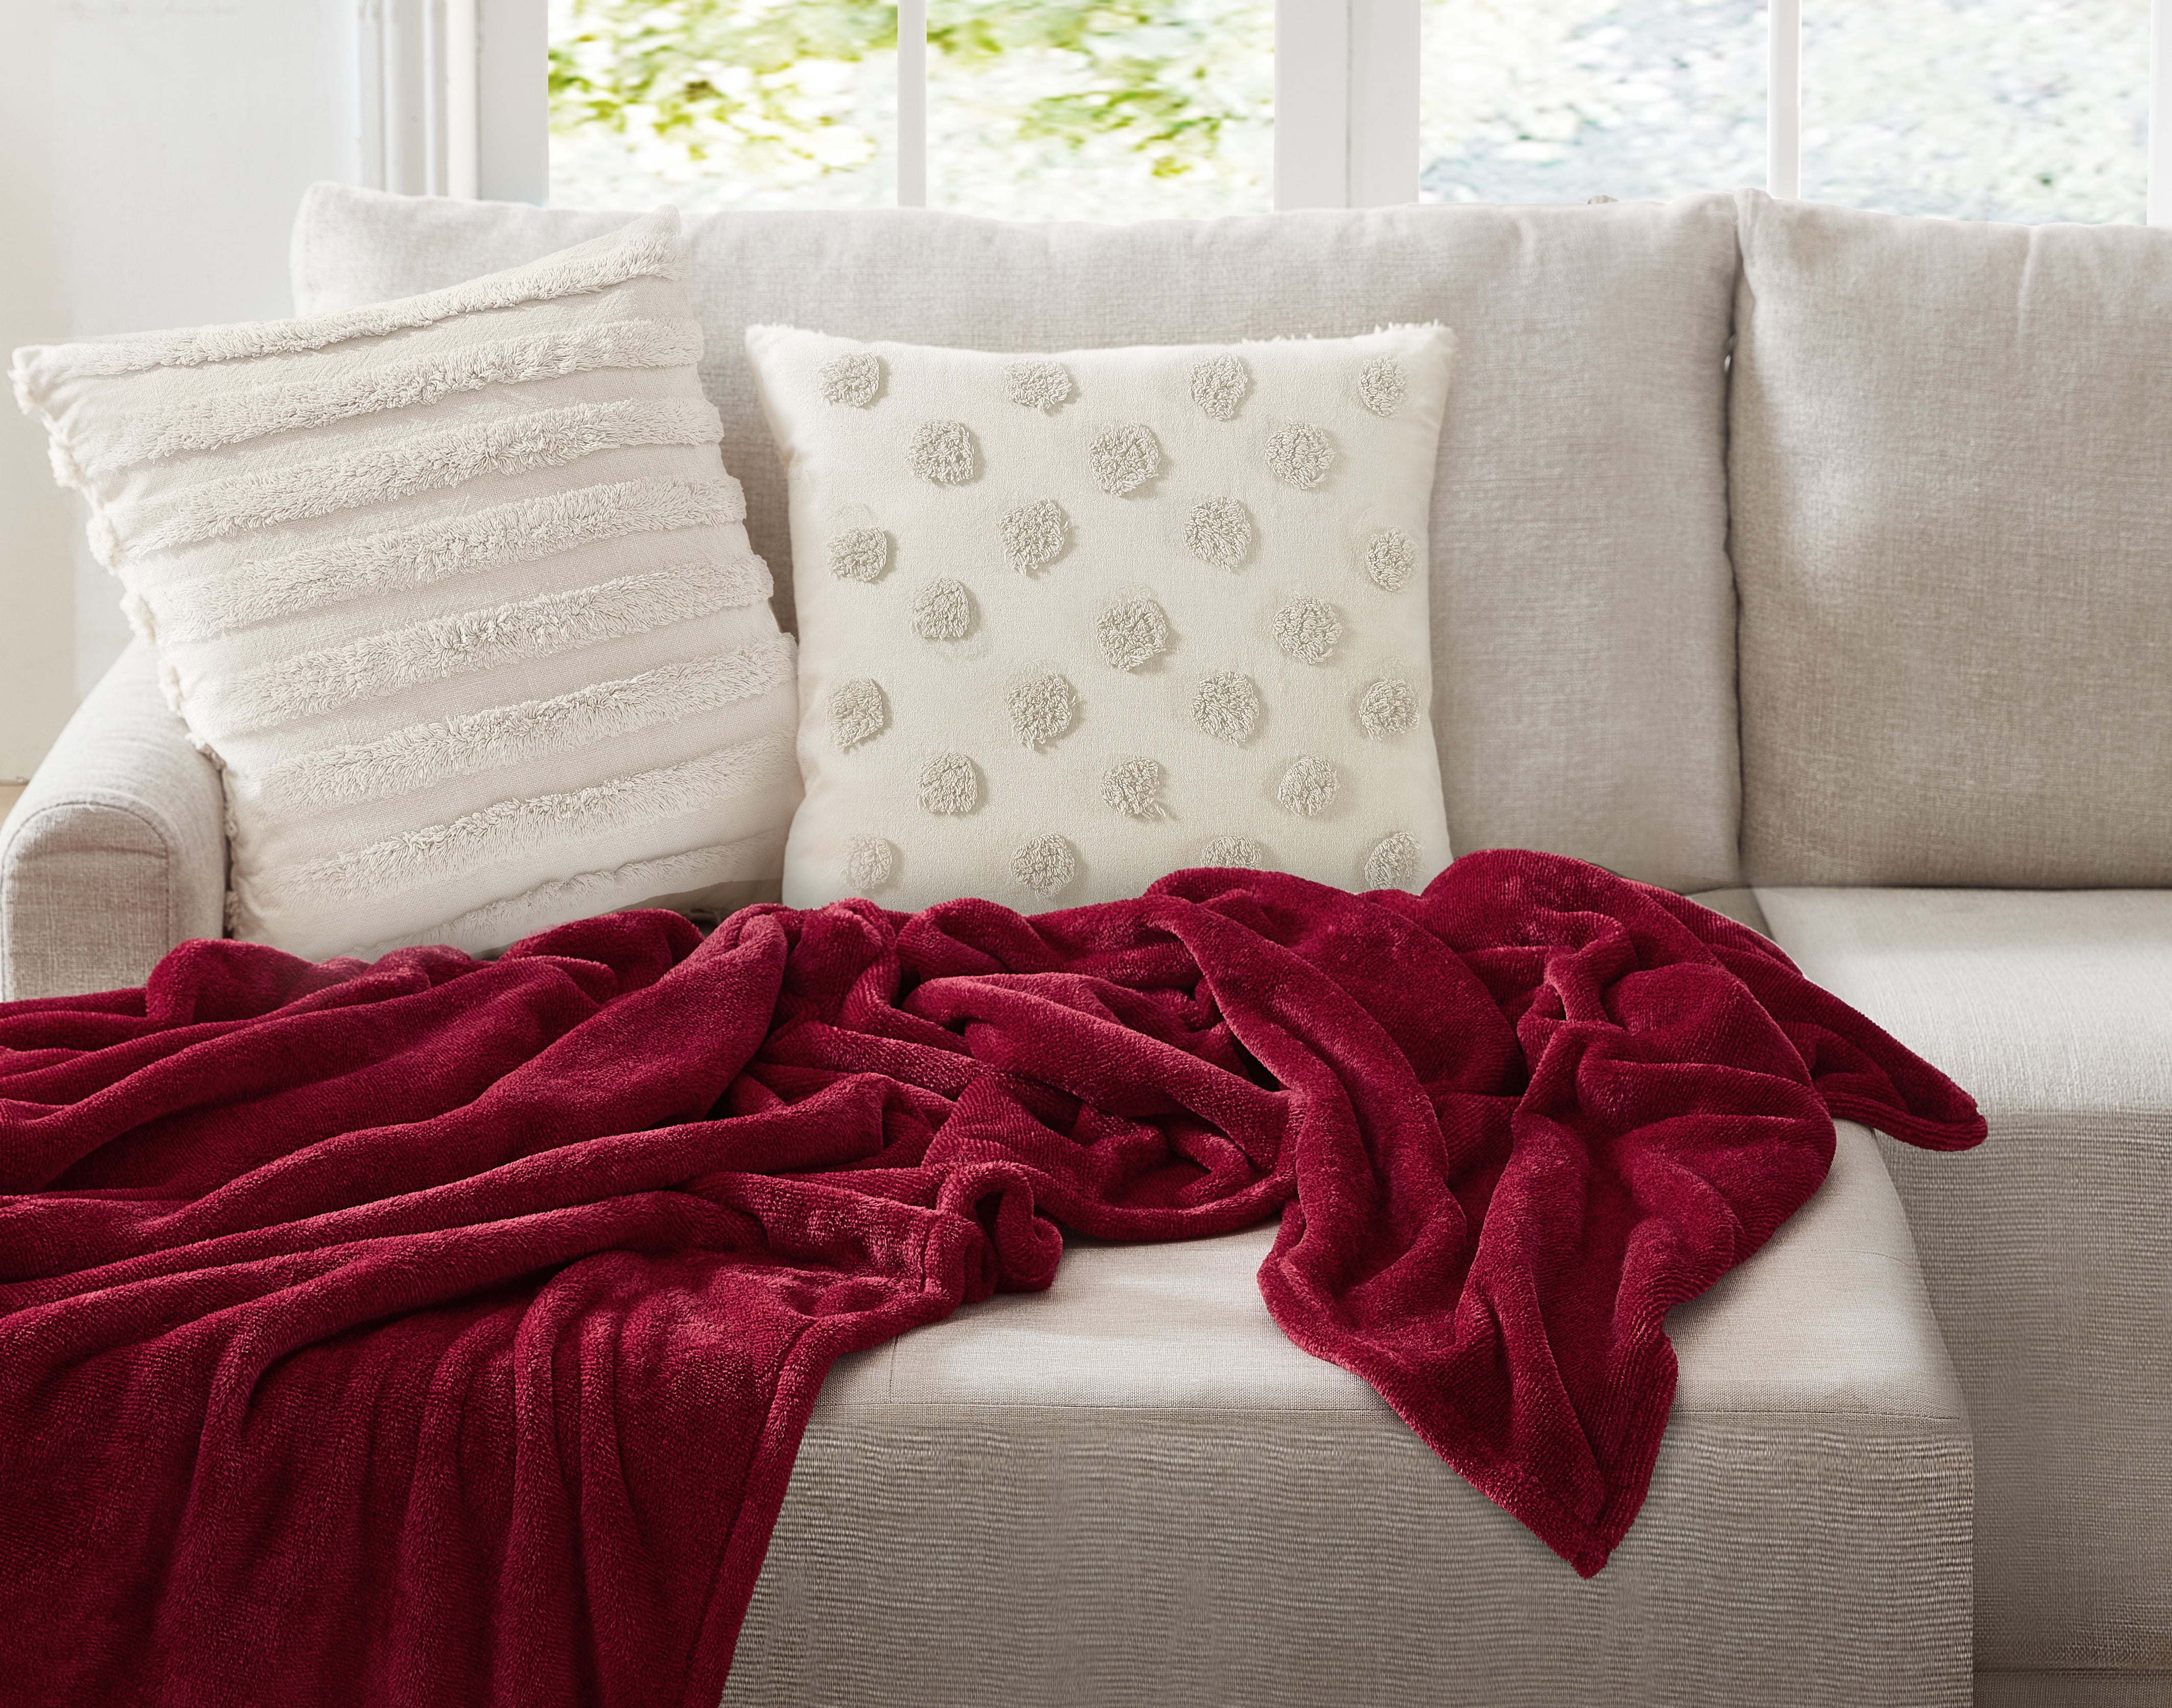 Mainstays Solid Plush Blanket, Red, Twin